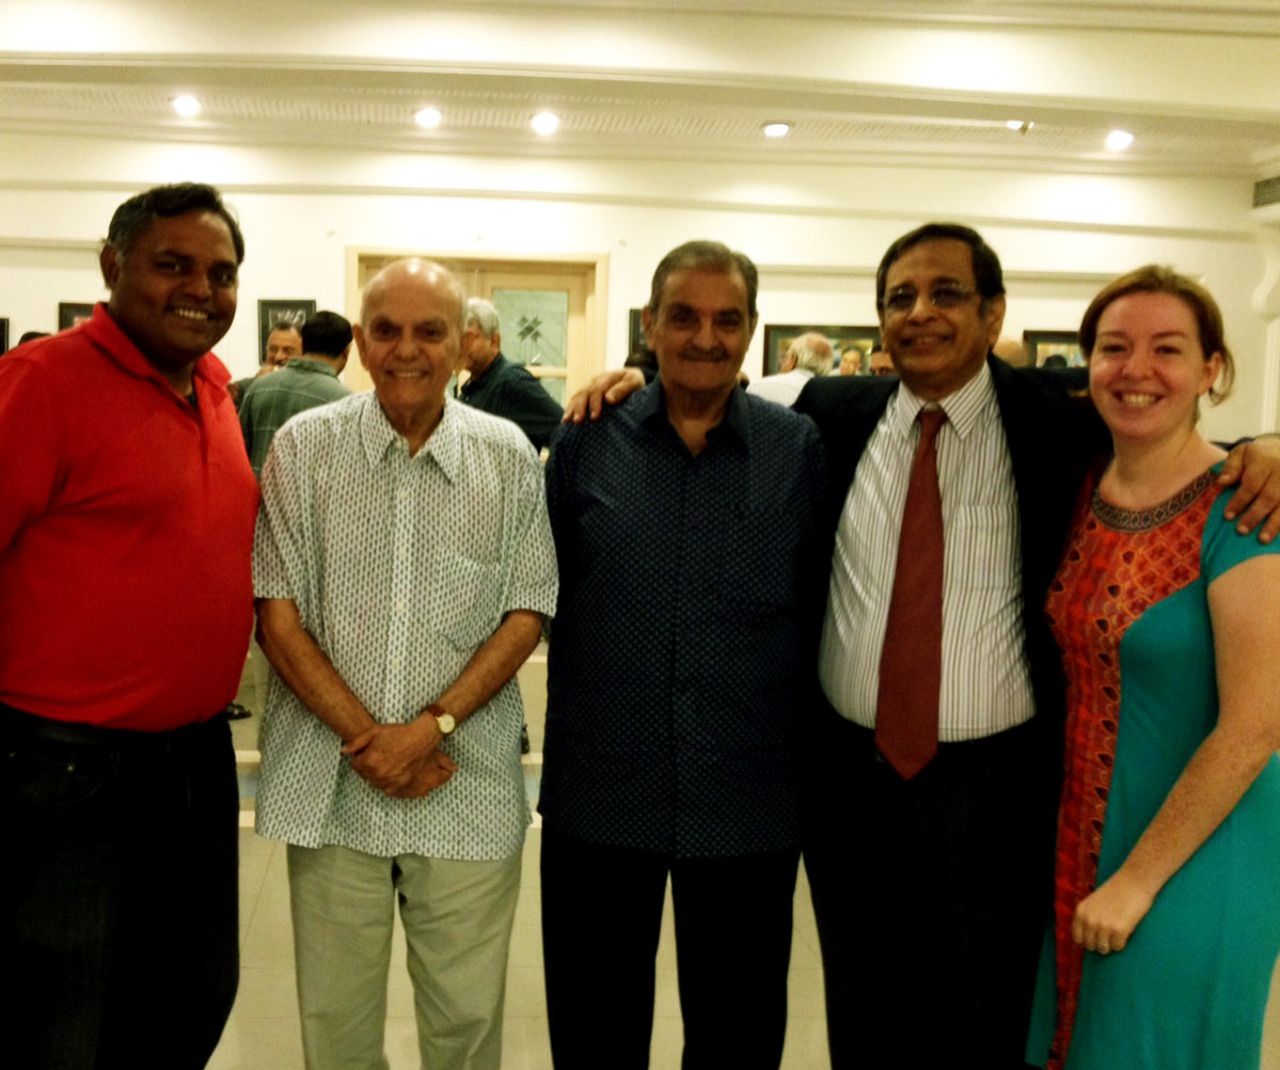 Subash Jayaraman (extreme left) and his wife Kathleen with former India cricketers Madhav Apte (second from left) and Nari Contractor (middle), Cricket Club of India, Mumbai